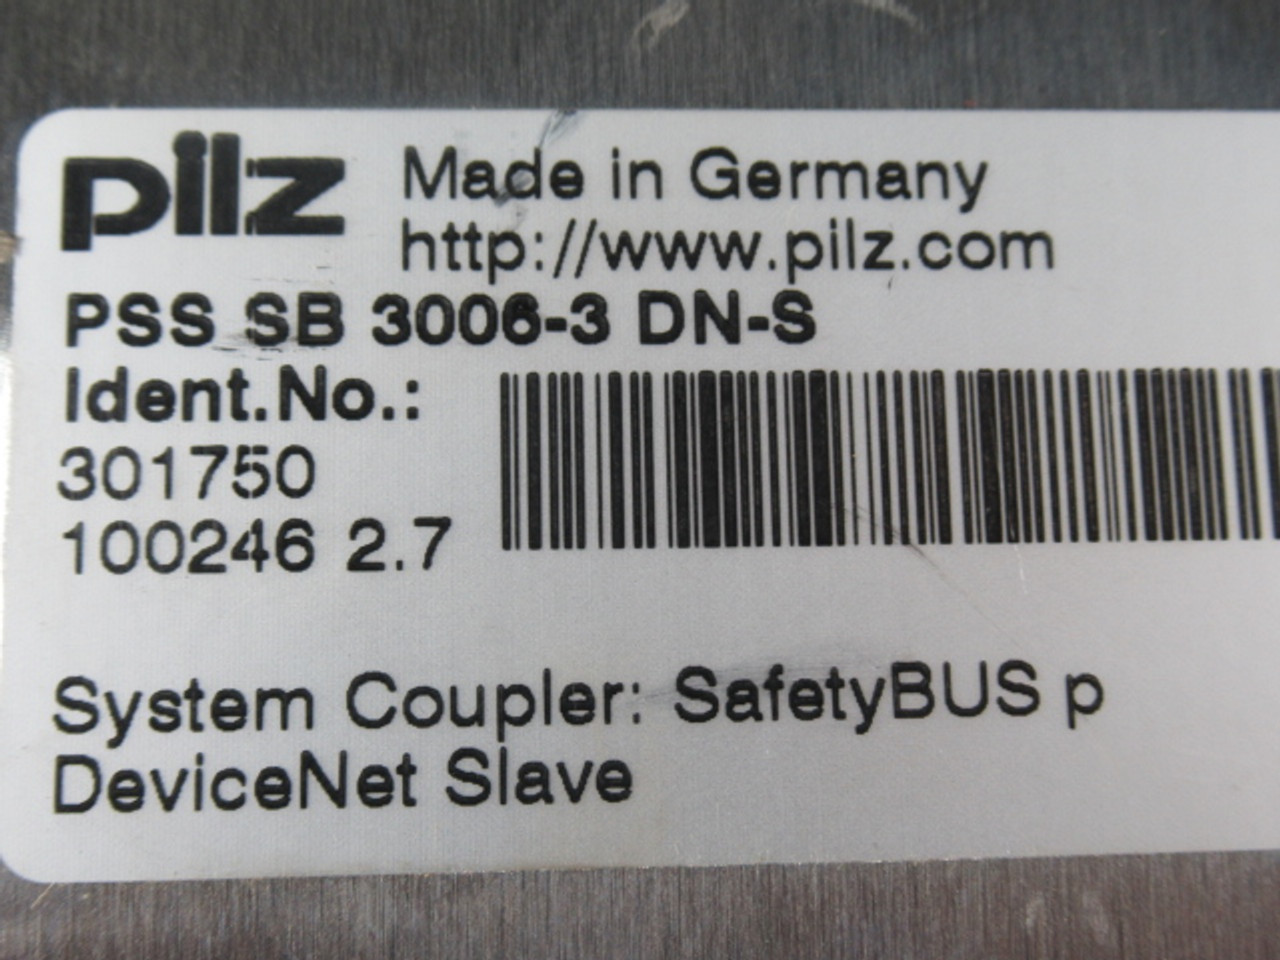 Pilz PSS SB 3006-3 DN-S Compact Safety Sytem 301740 24VDC USED